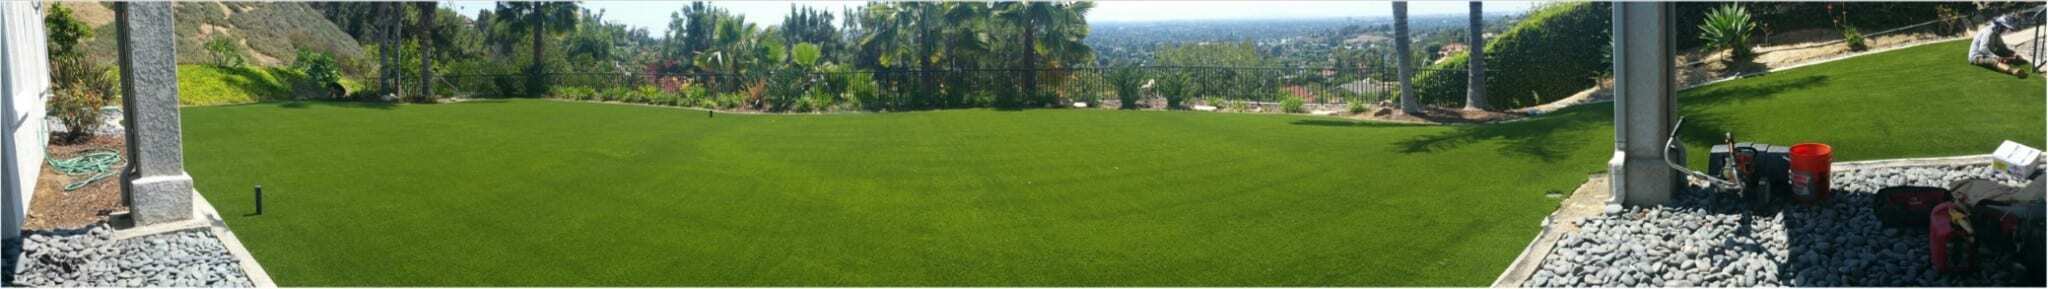 Artificial Grass & Turf Products for any landscape, Orange County